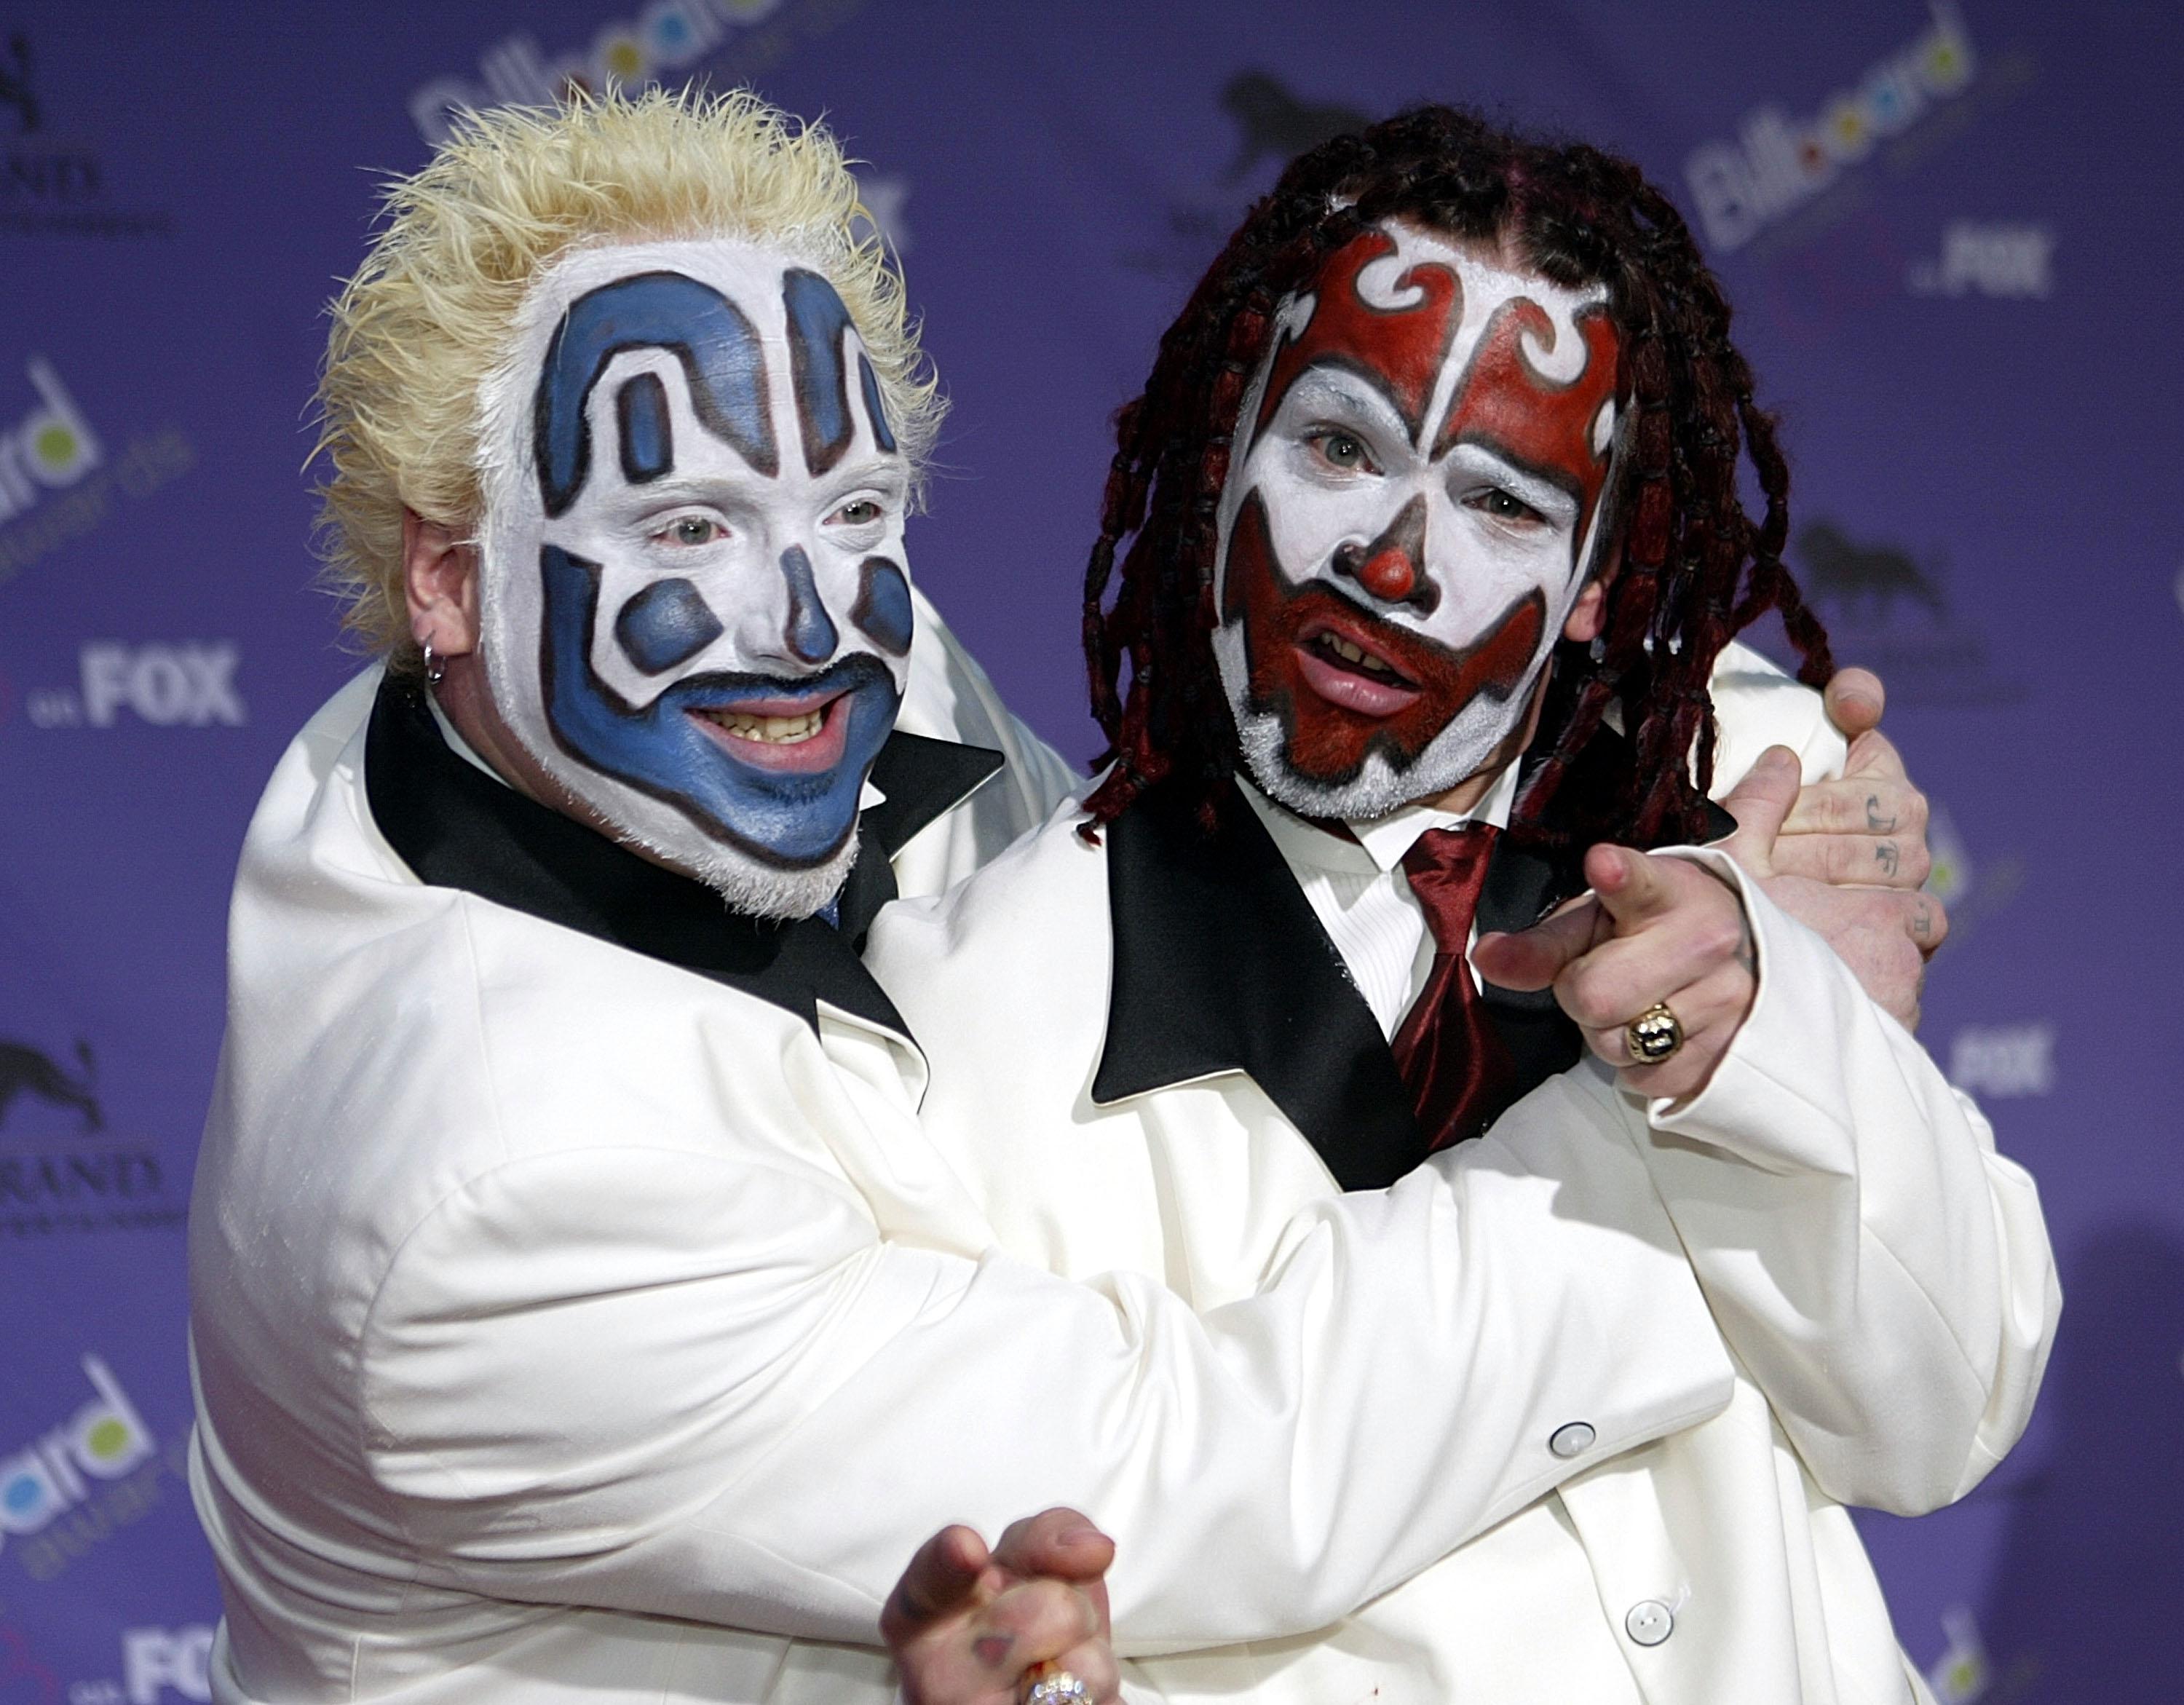 Insane Clown Posse way back in 2003, before cryptocurrencies were a twinkle...